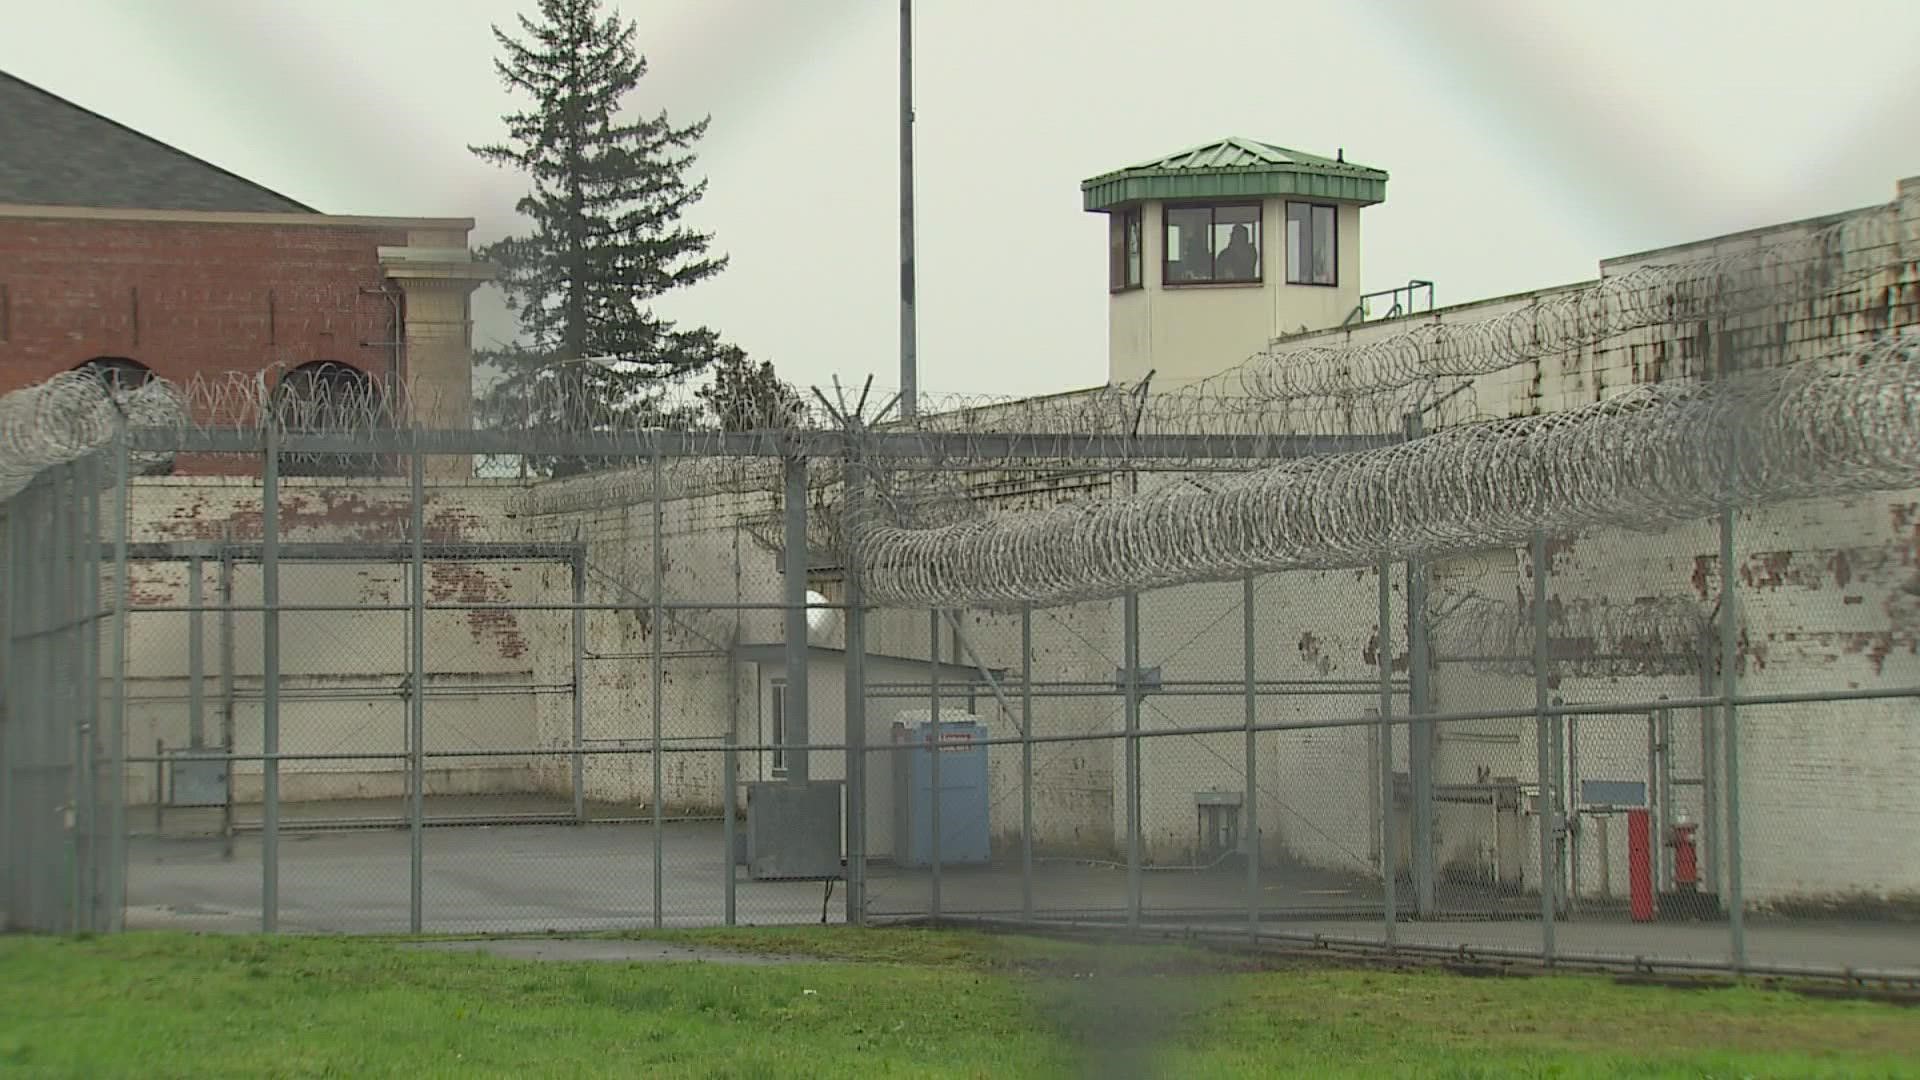 A union representing some prison employees says workers are exhausted and morale is low.